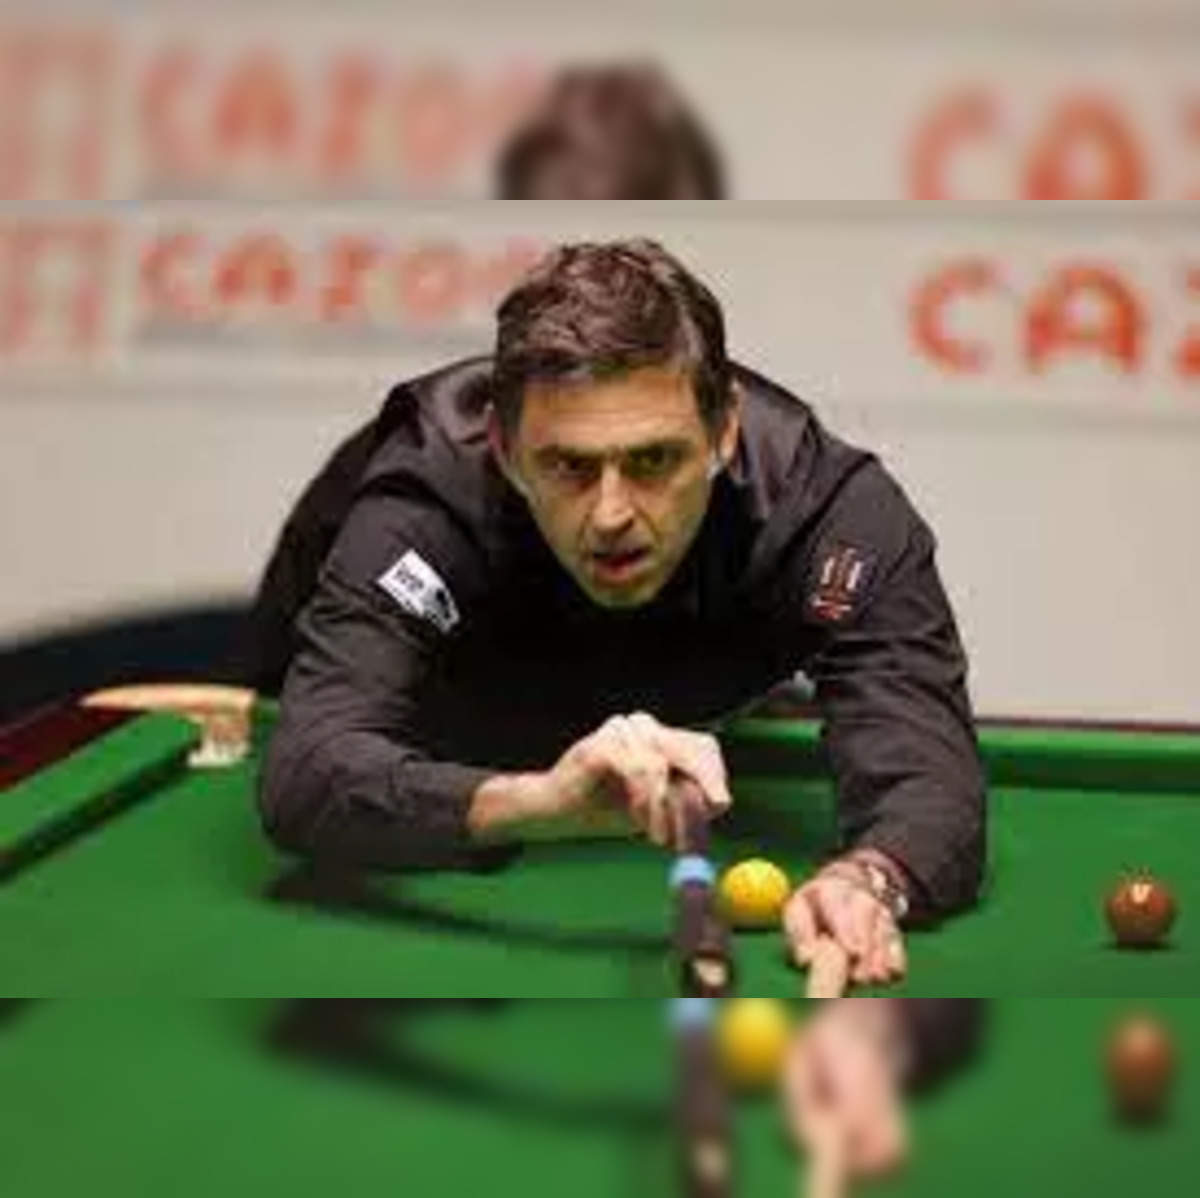 british open snooker 2023 British Open Snooker 2023 Live streaming, TV schedule, prize money, line-up, where to watch